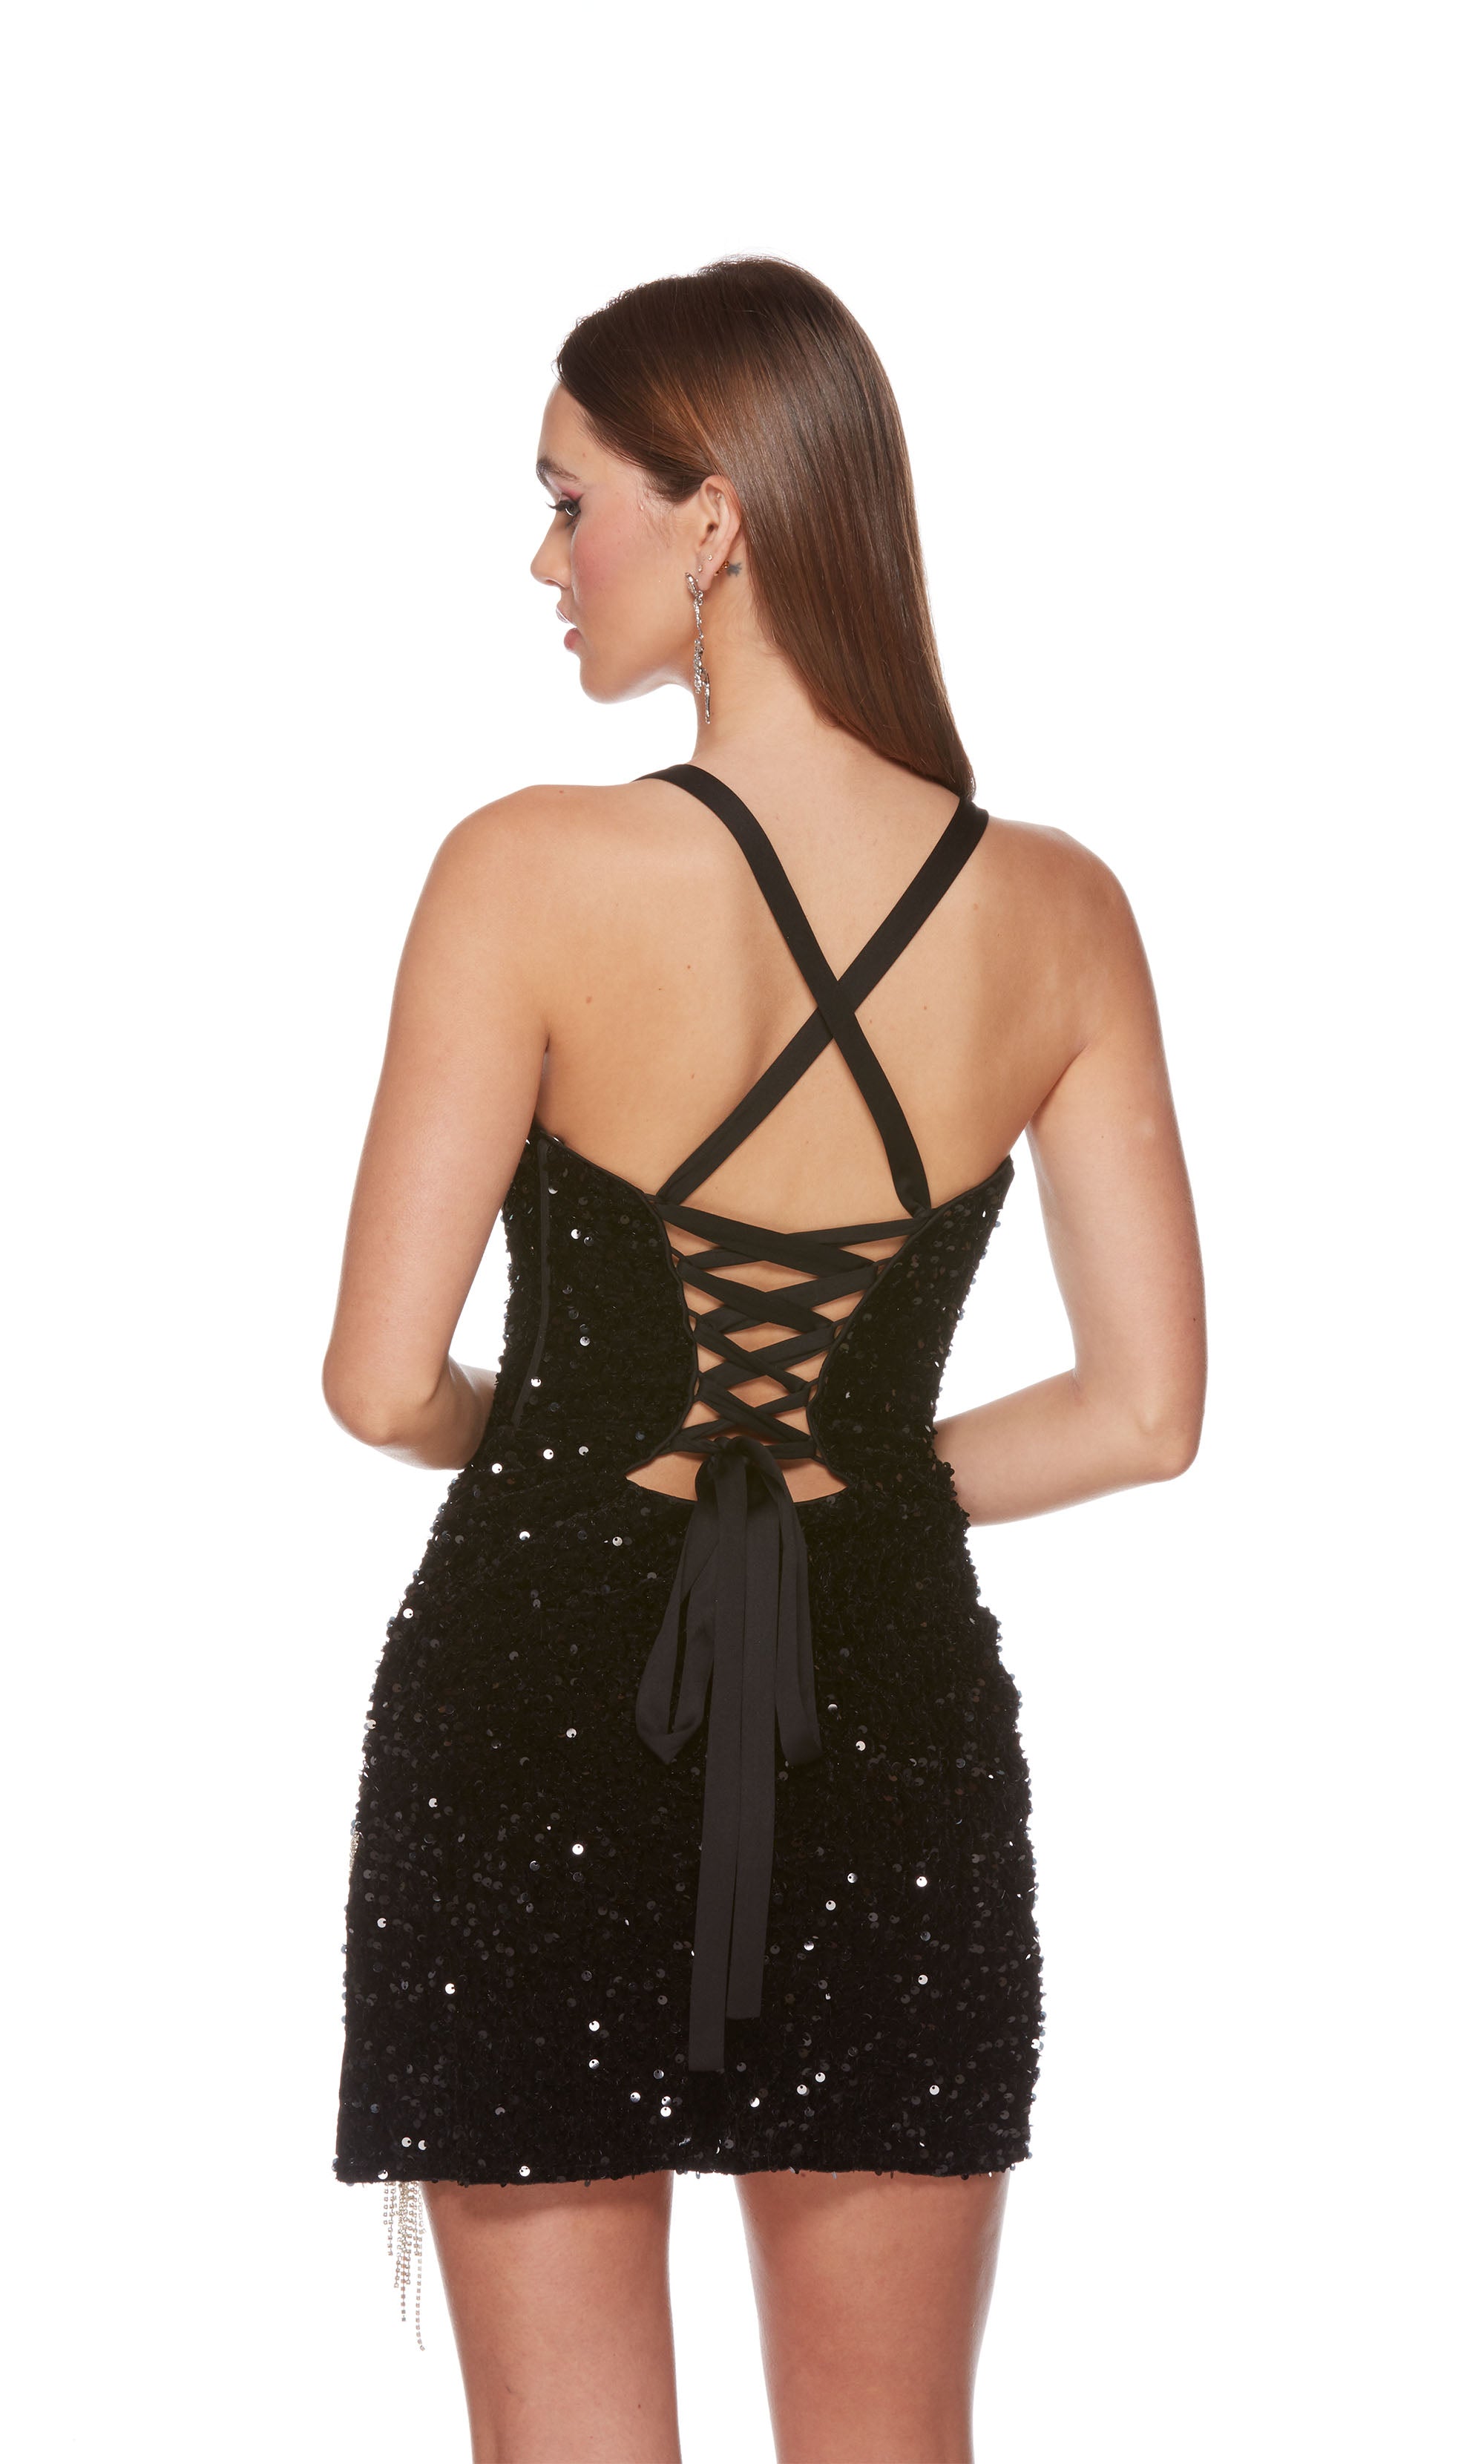 A playful, plunging neckline black sequin corset dress highlighting a side slit adorned with sparkly silver fringe and a lace-up back, for the perfect fit. The dress was accessorized with long black satin gloves which are not included with dress purchase.